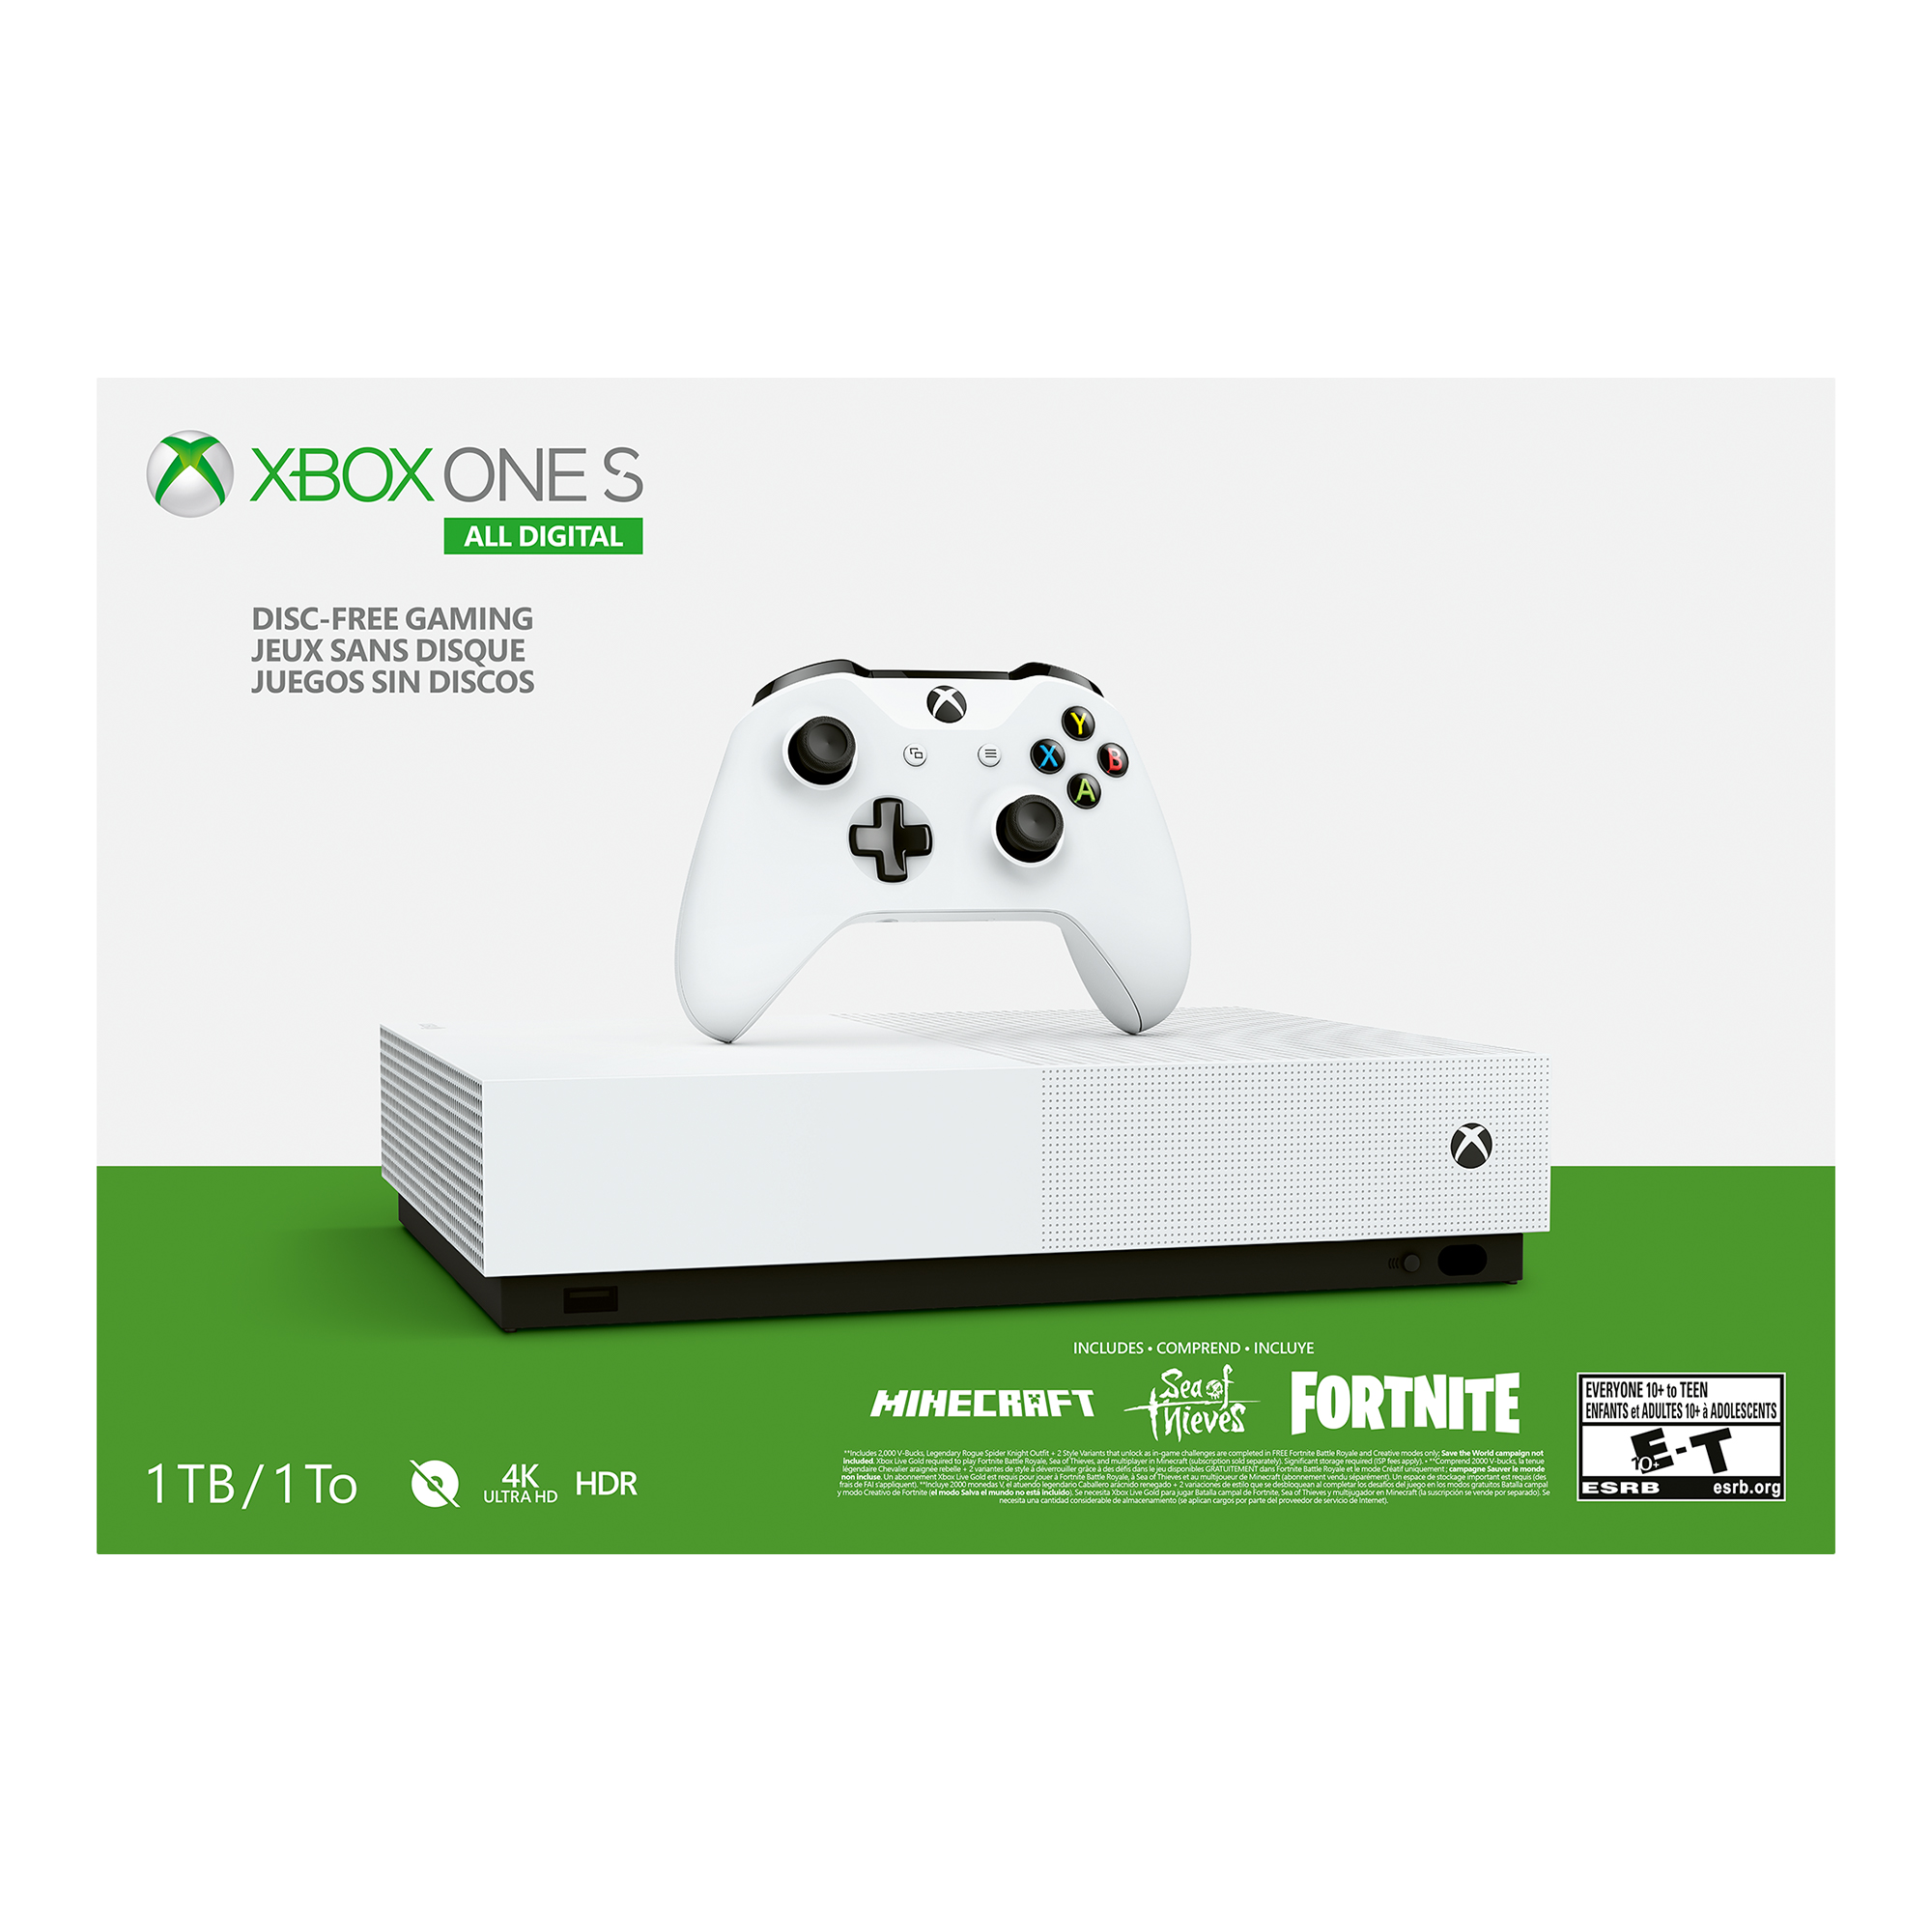 Microsoft Xbox One S 1TB All Digital Edition 3 Game Bundle (Disc-free Gaming), White, NJP-00050 - image 11 of 13